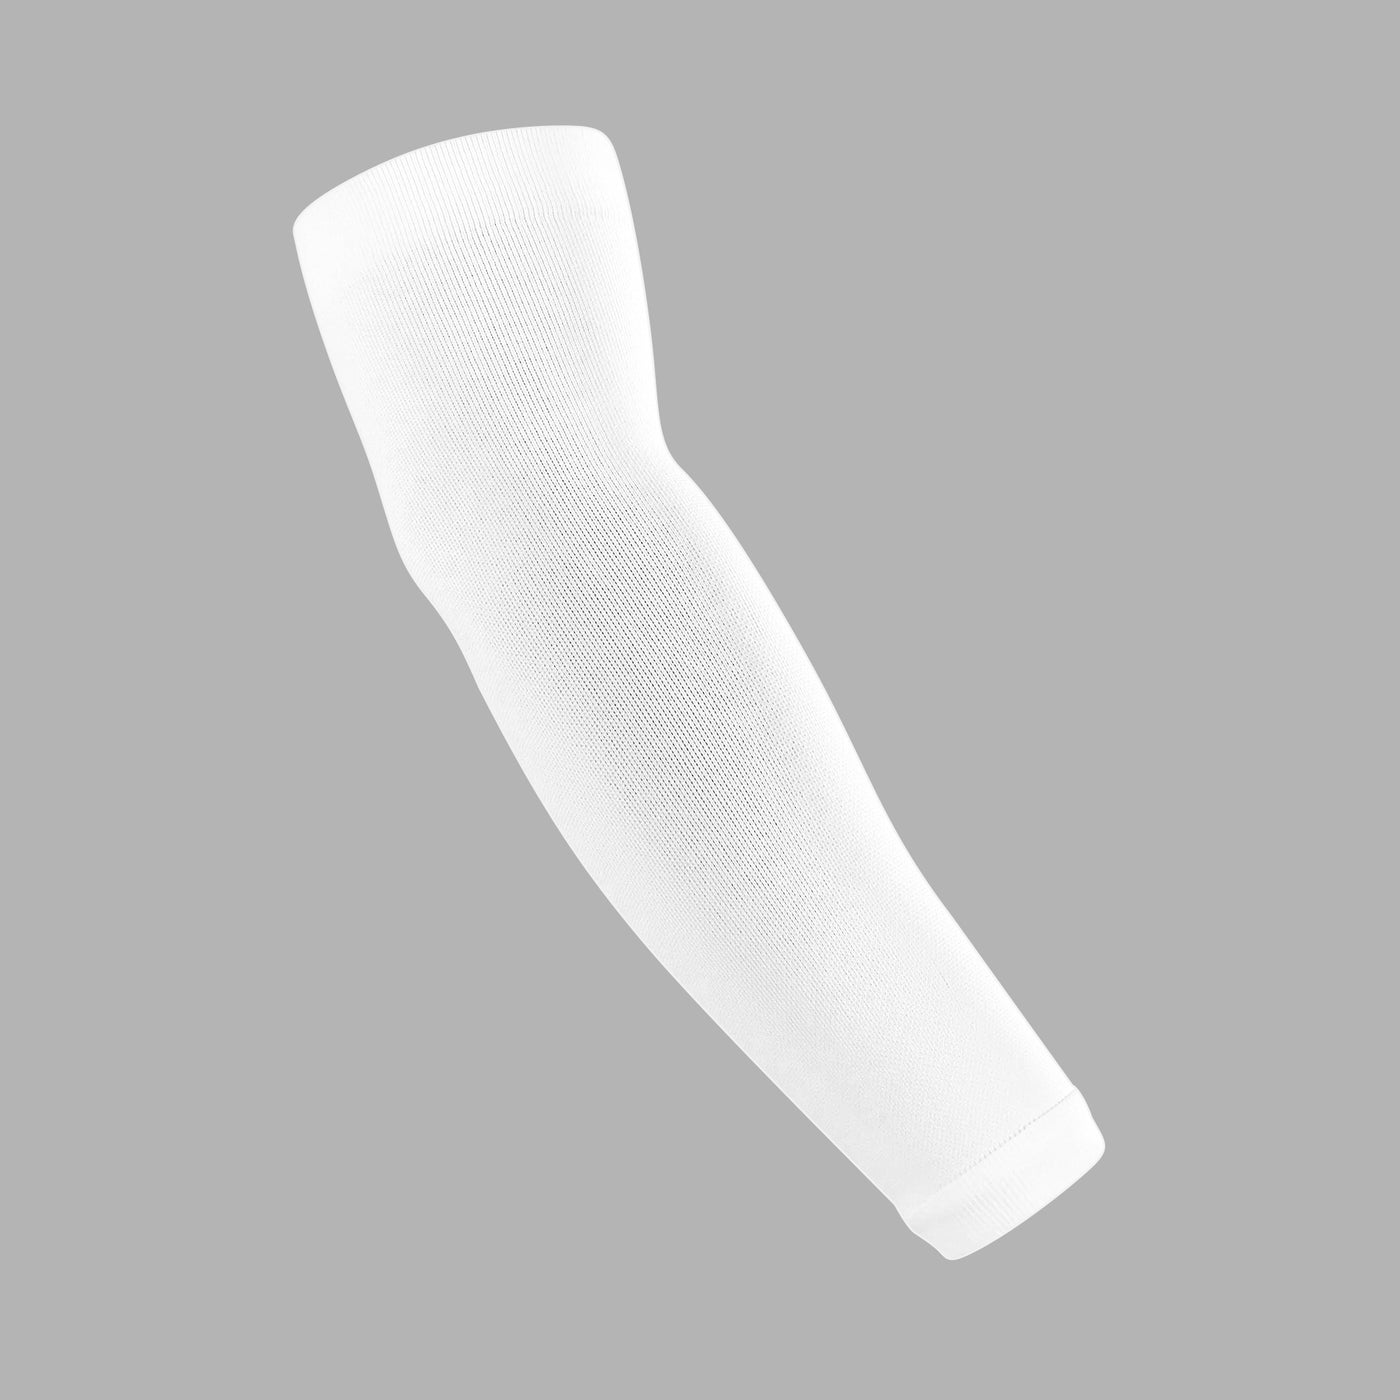 Basic White One Size Fits All Arm Sleeve